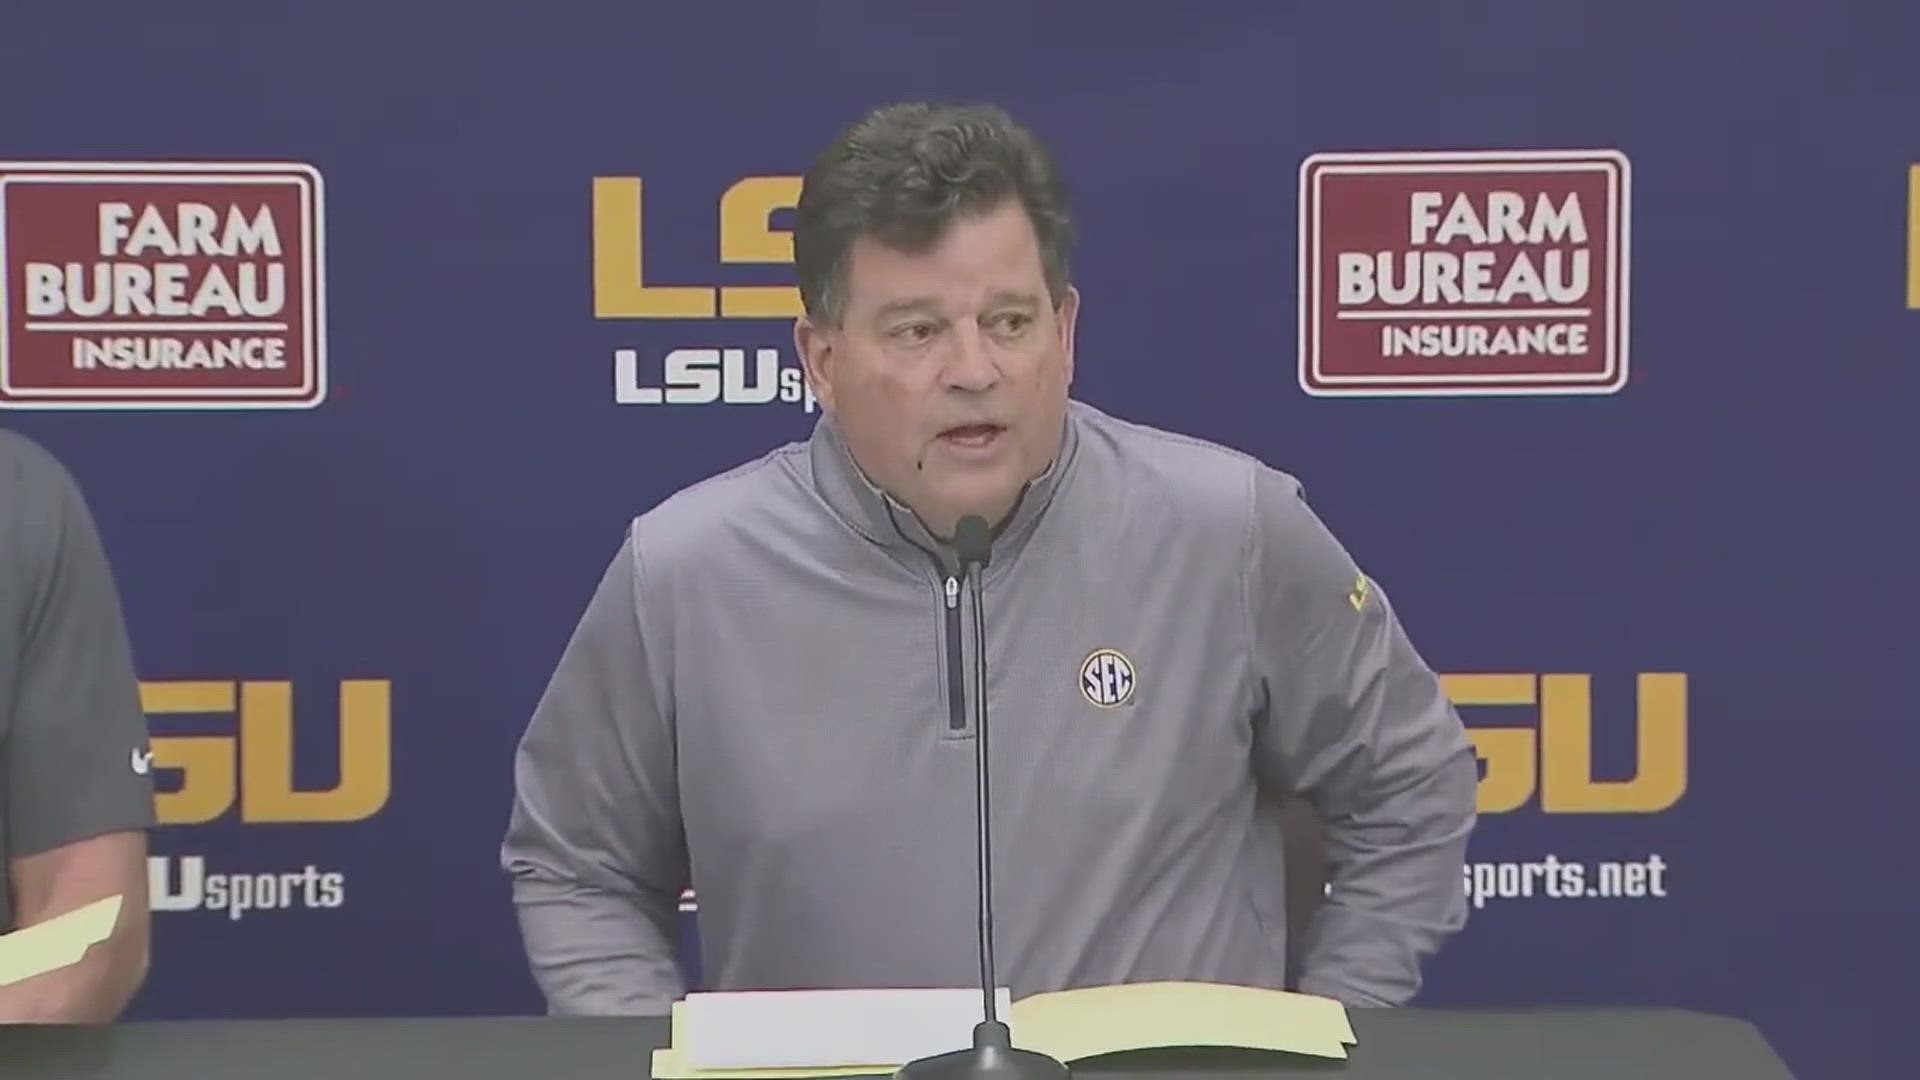 At the end of the football season head coach, Ed Orgeron will leave the LSU coaching staff.